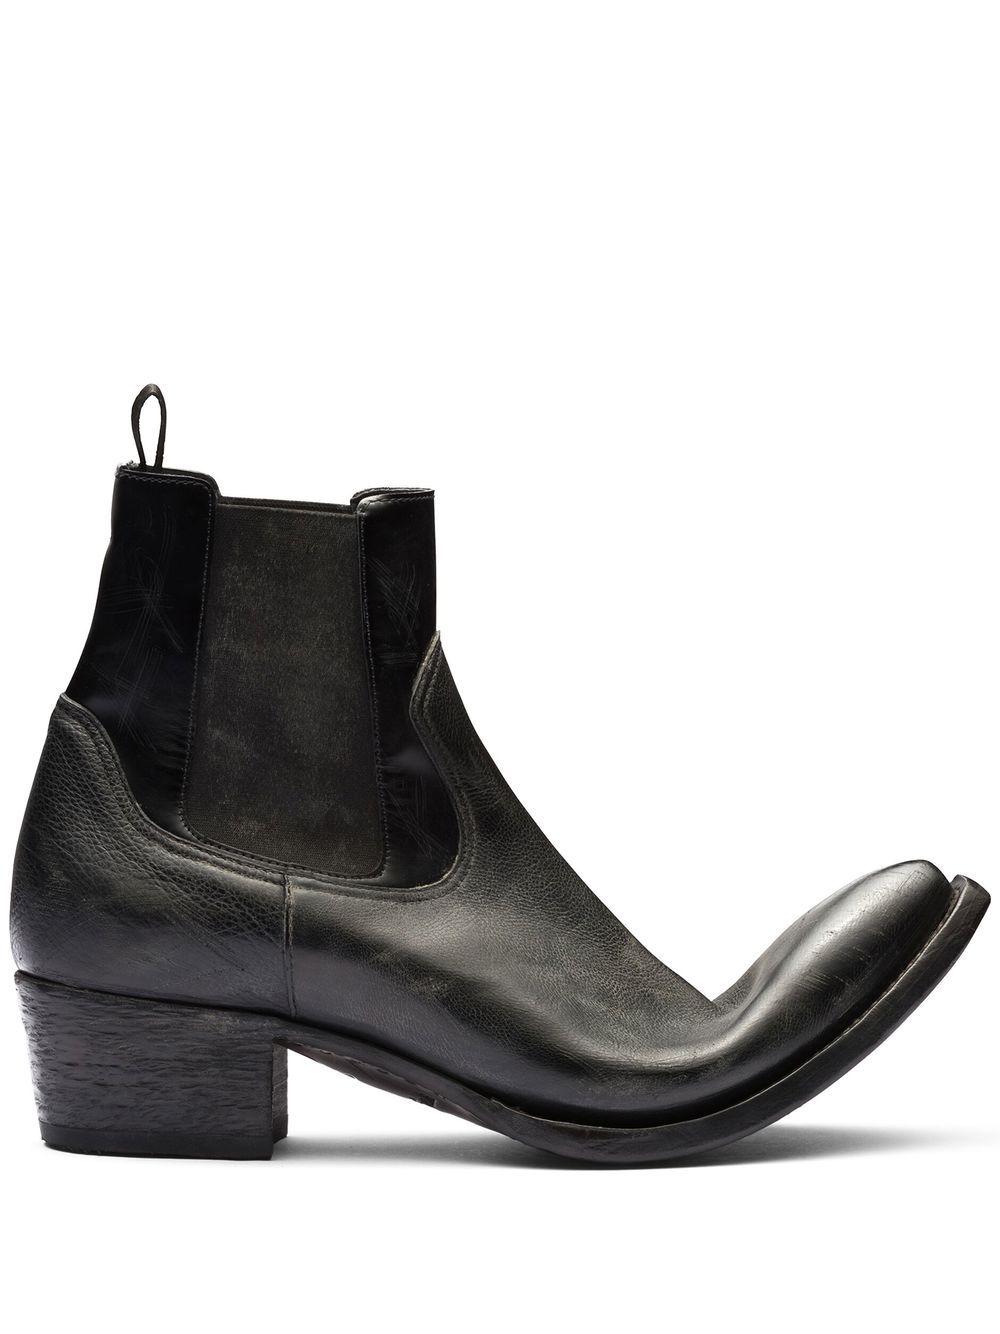 Prada Turn-up Toe Cowboy Boots in Black for Men | Lyst